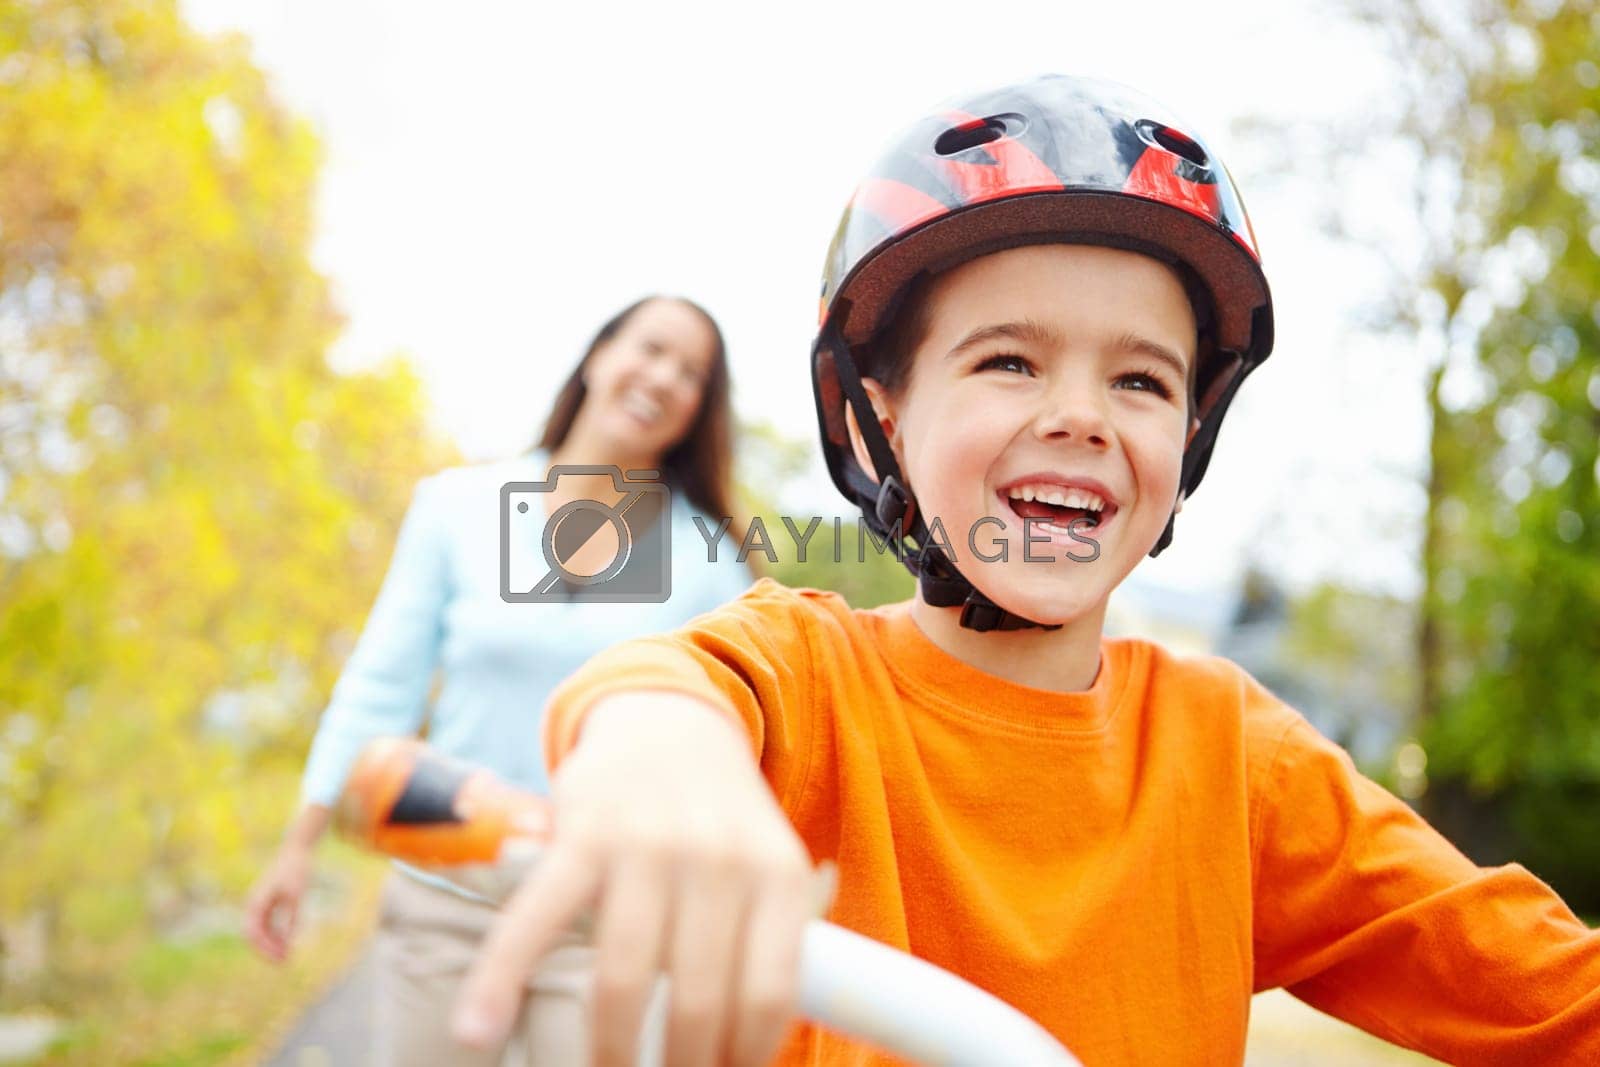 Royalty free image of Woohoo. A little boy riding a bicycle in the park with his mother standing behind him. by YuriArcurs